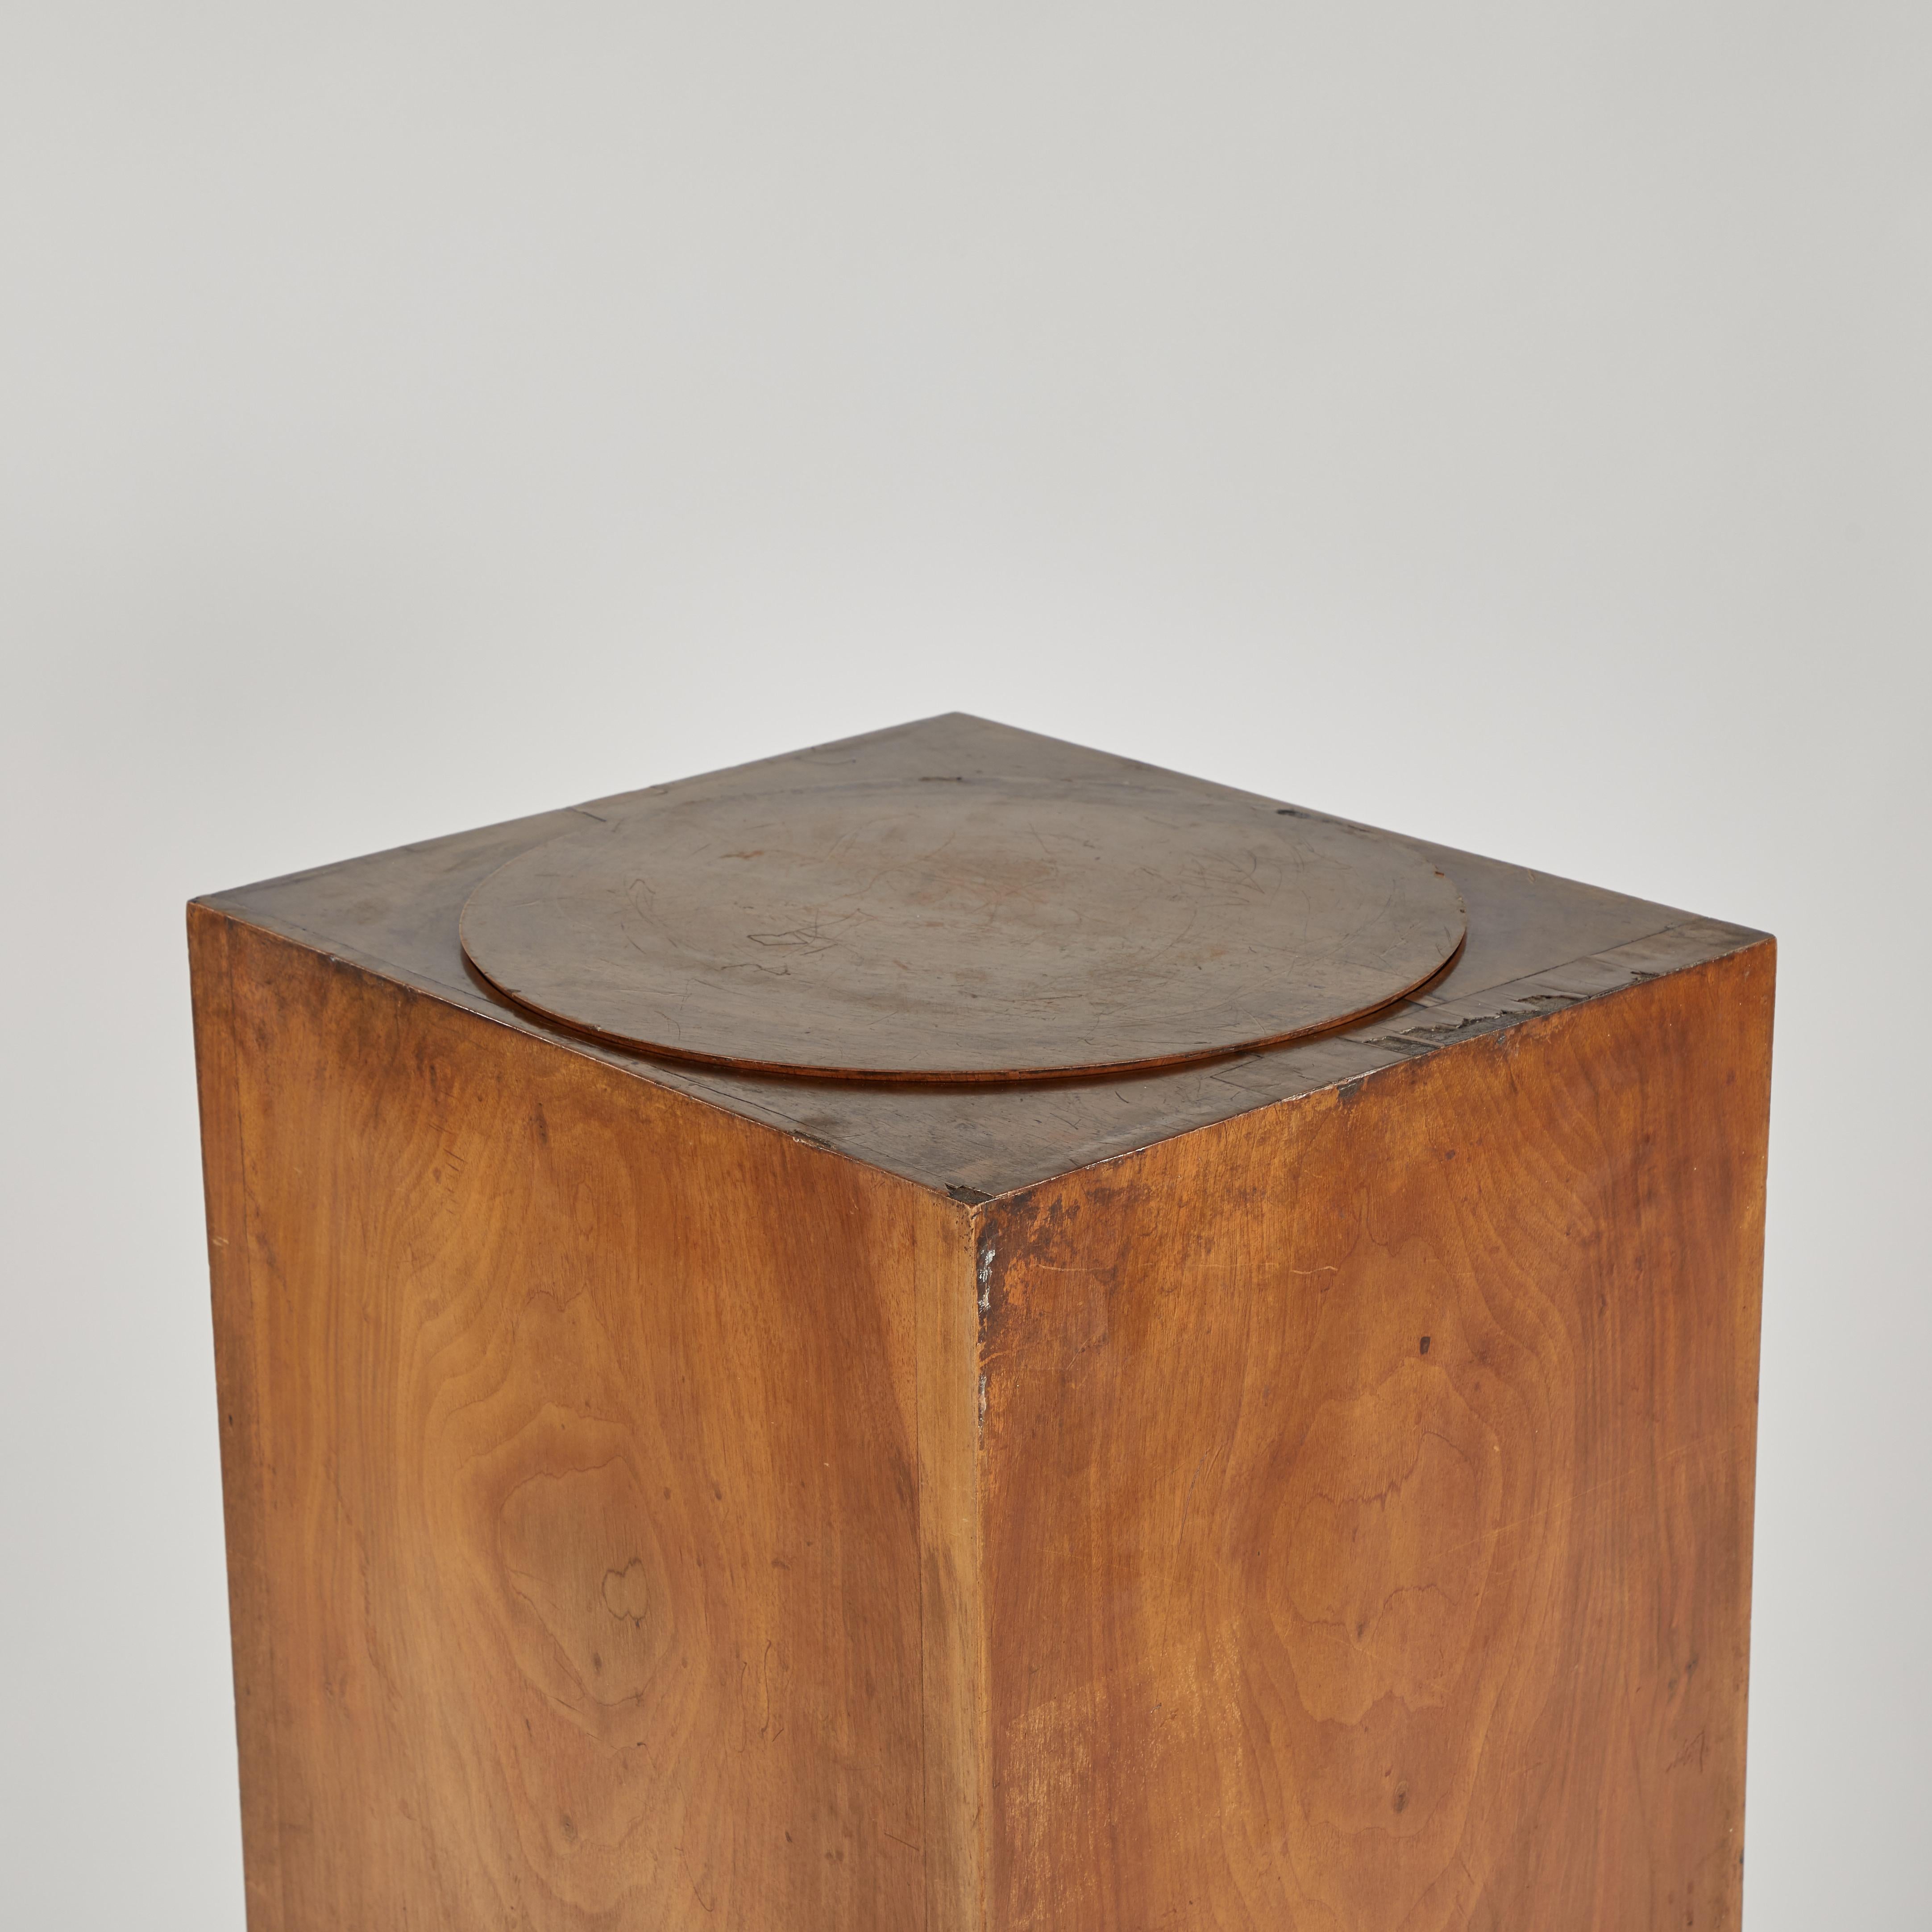 Walnut plinth with revolving top from late 19th-century England. Ideal for the full-sided presentation of a sculpture or decorative object, the height and dimensions of this classic piece make it highly versatile. Traditional yet minimalist, the